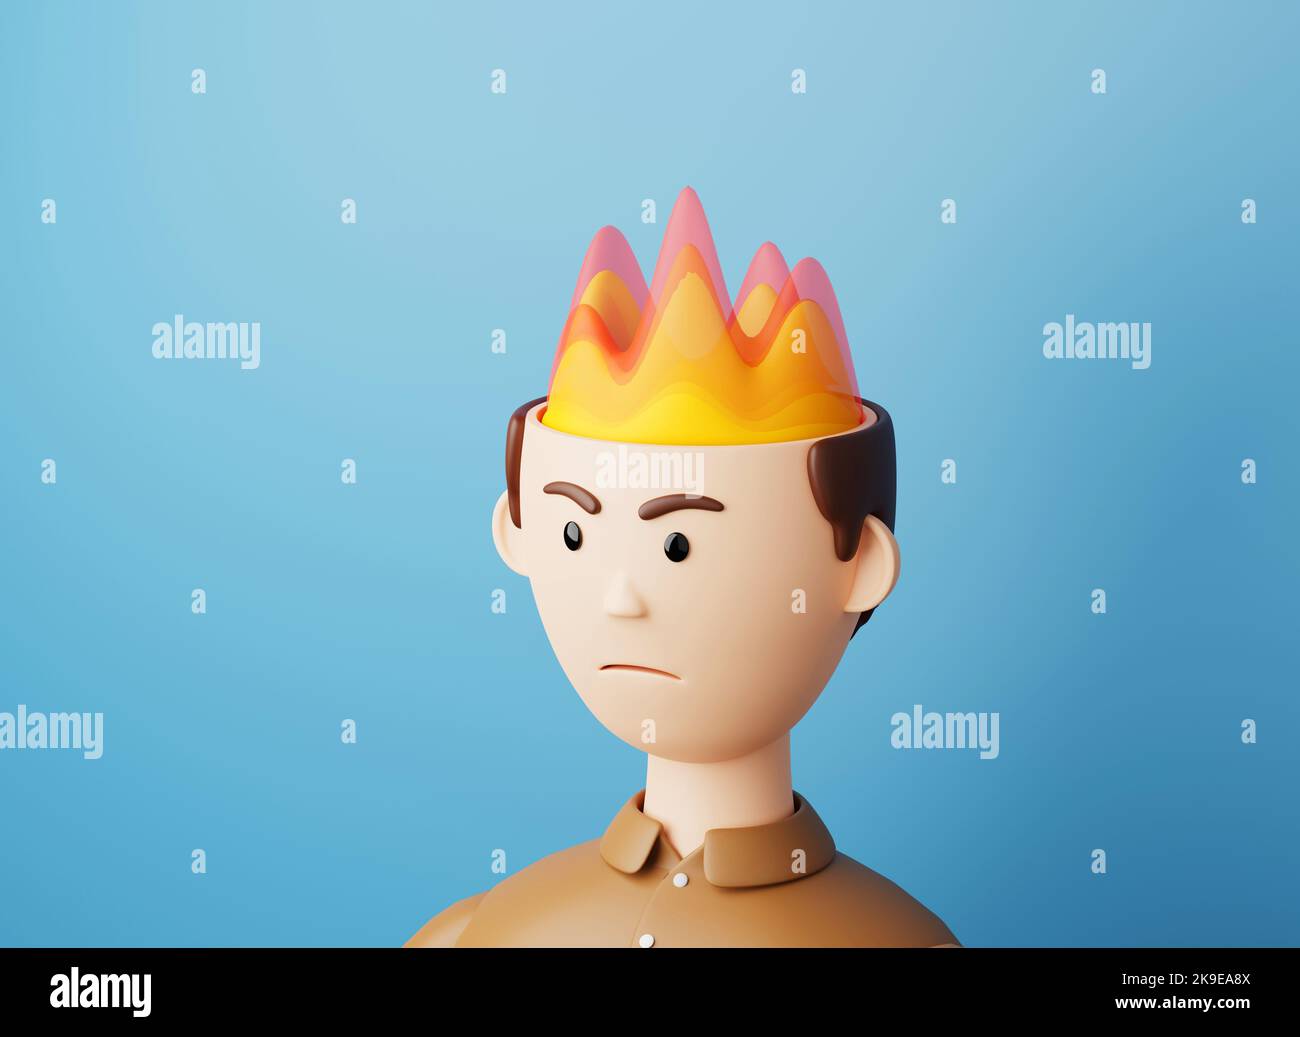 Angry man. Fire from the head of a man as a symbol of anger and stress. 3d render. Stock Photo